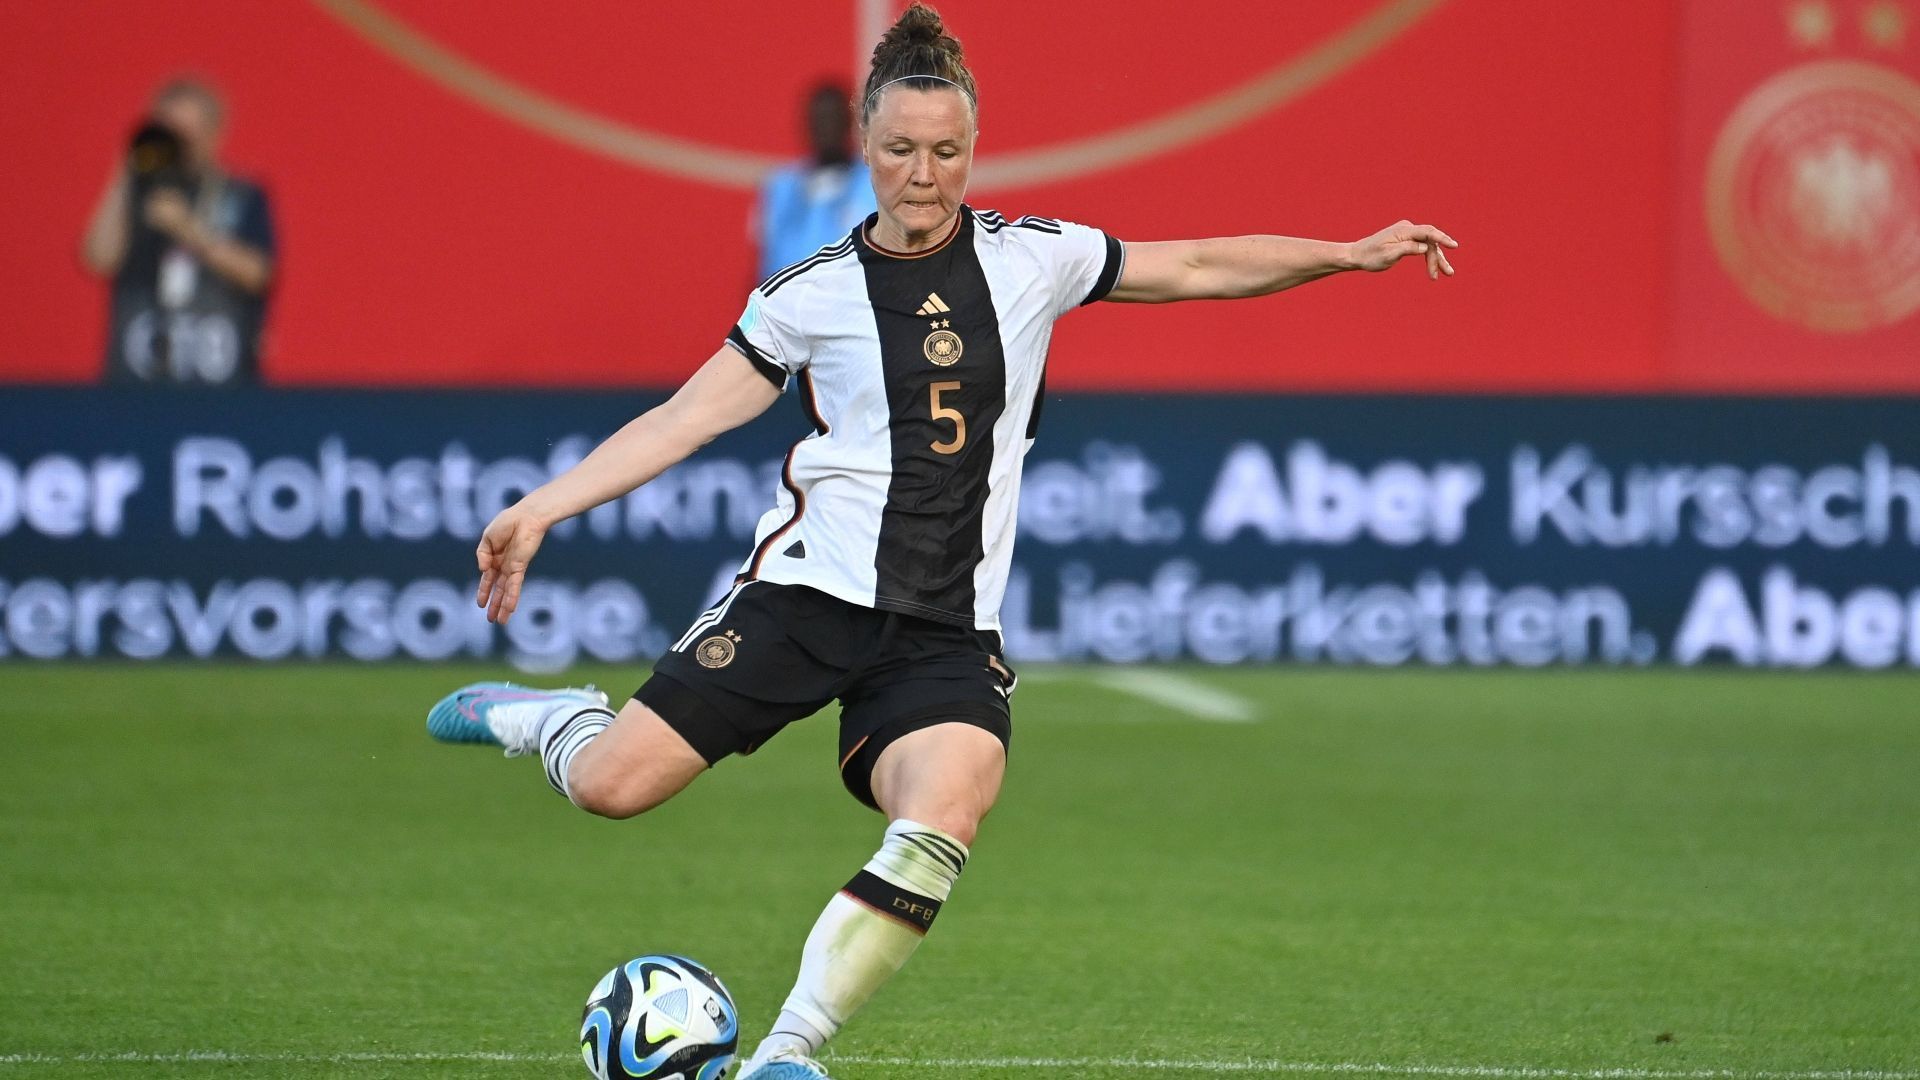 
                <strong>Marina Hegering</strong><br>
                &#x2022; <strong>Position: </strong>Abwehr<br>&#x2022; <strong>Verein: </strong>VfL Wolfsburg<br>&#x2022; <strong>Trikotnummer: </strong><br>&#x2022; <strong>Alter: </strong><br>&#x2022; <strong>Länderspiele: </strong><br>&#x2022; <strong>Länderspiel-Tore: </strong><br>
              